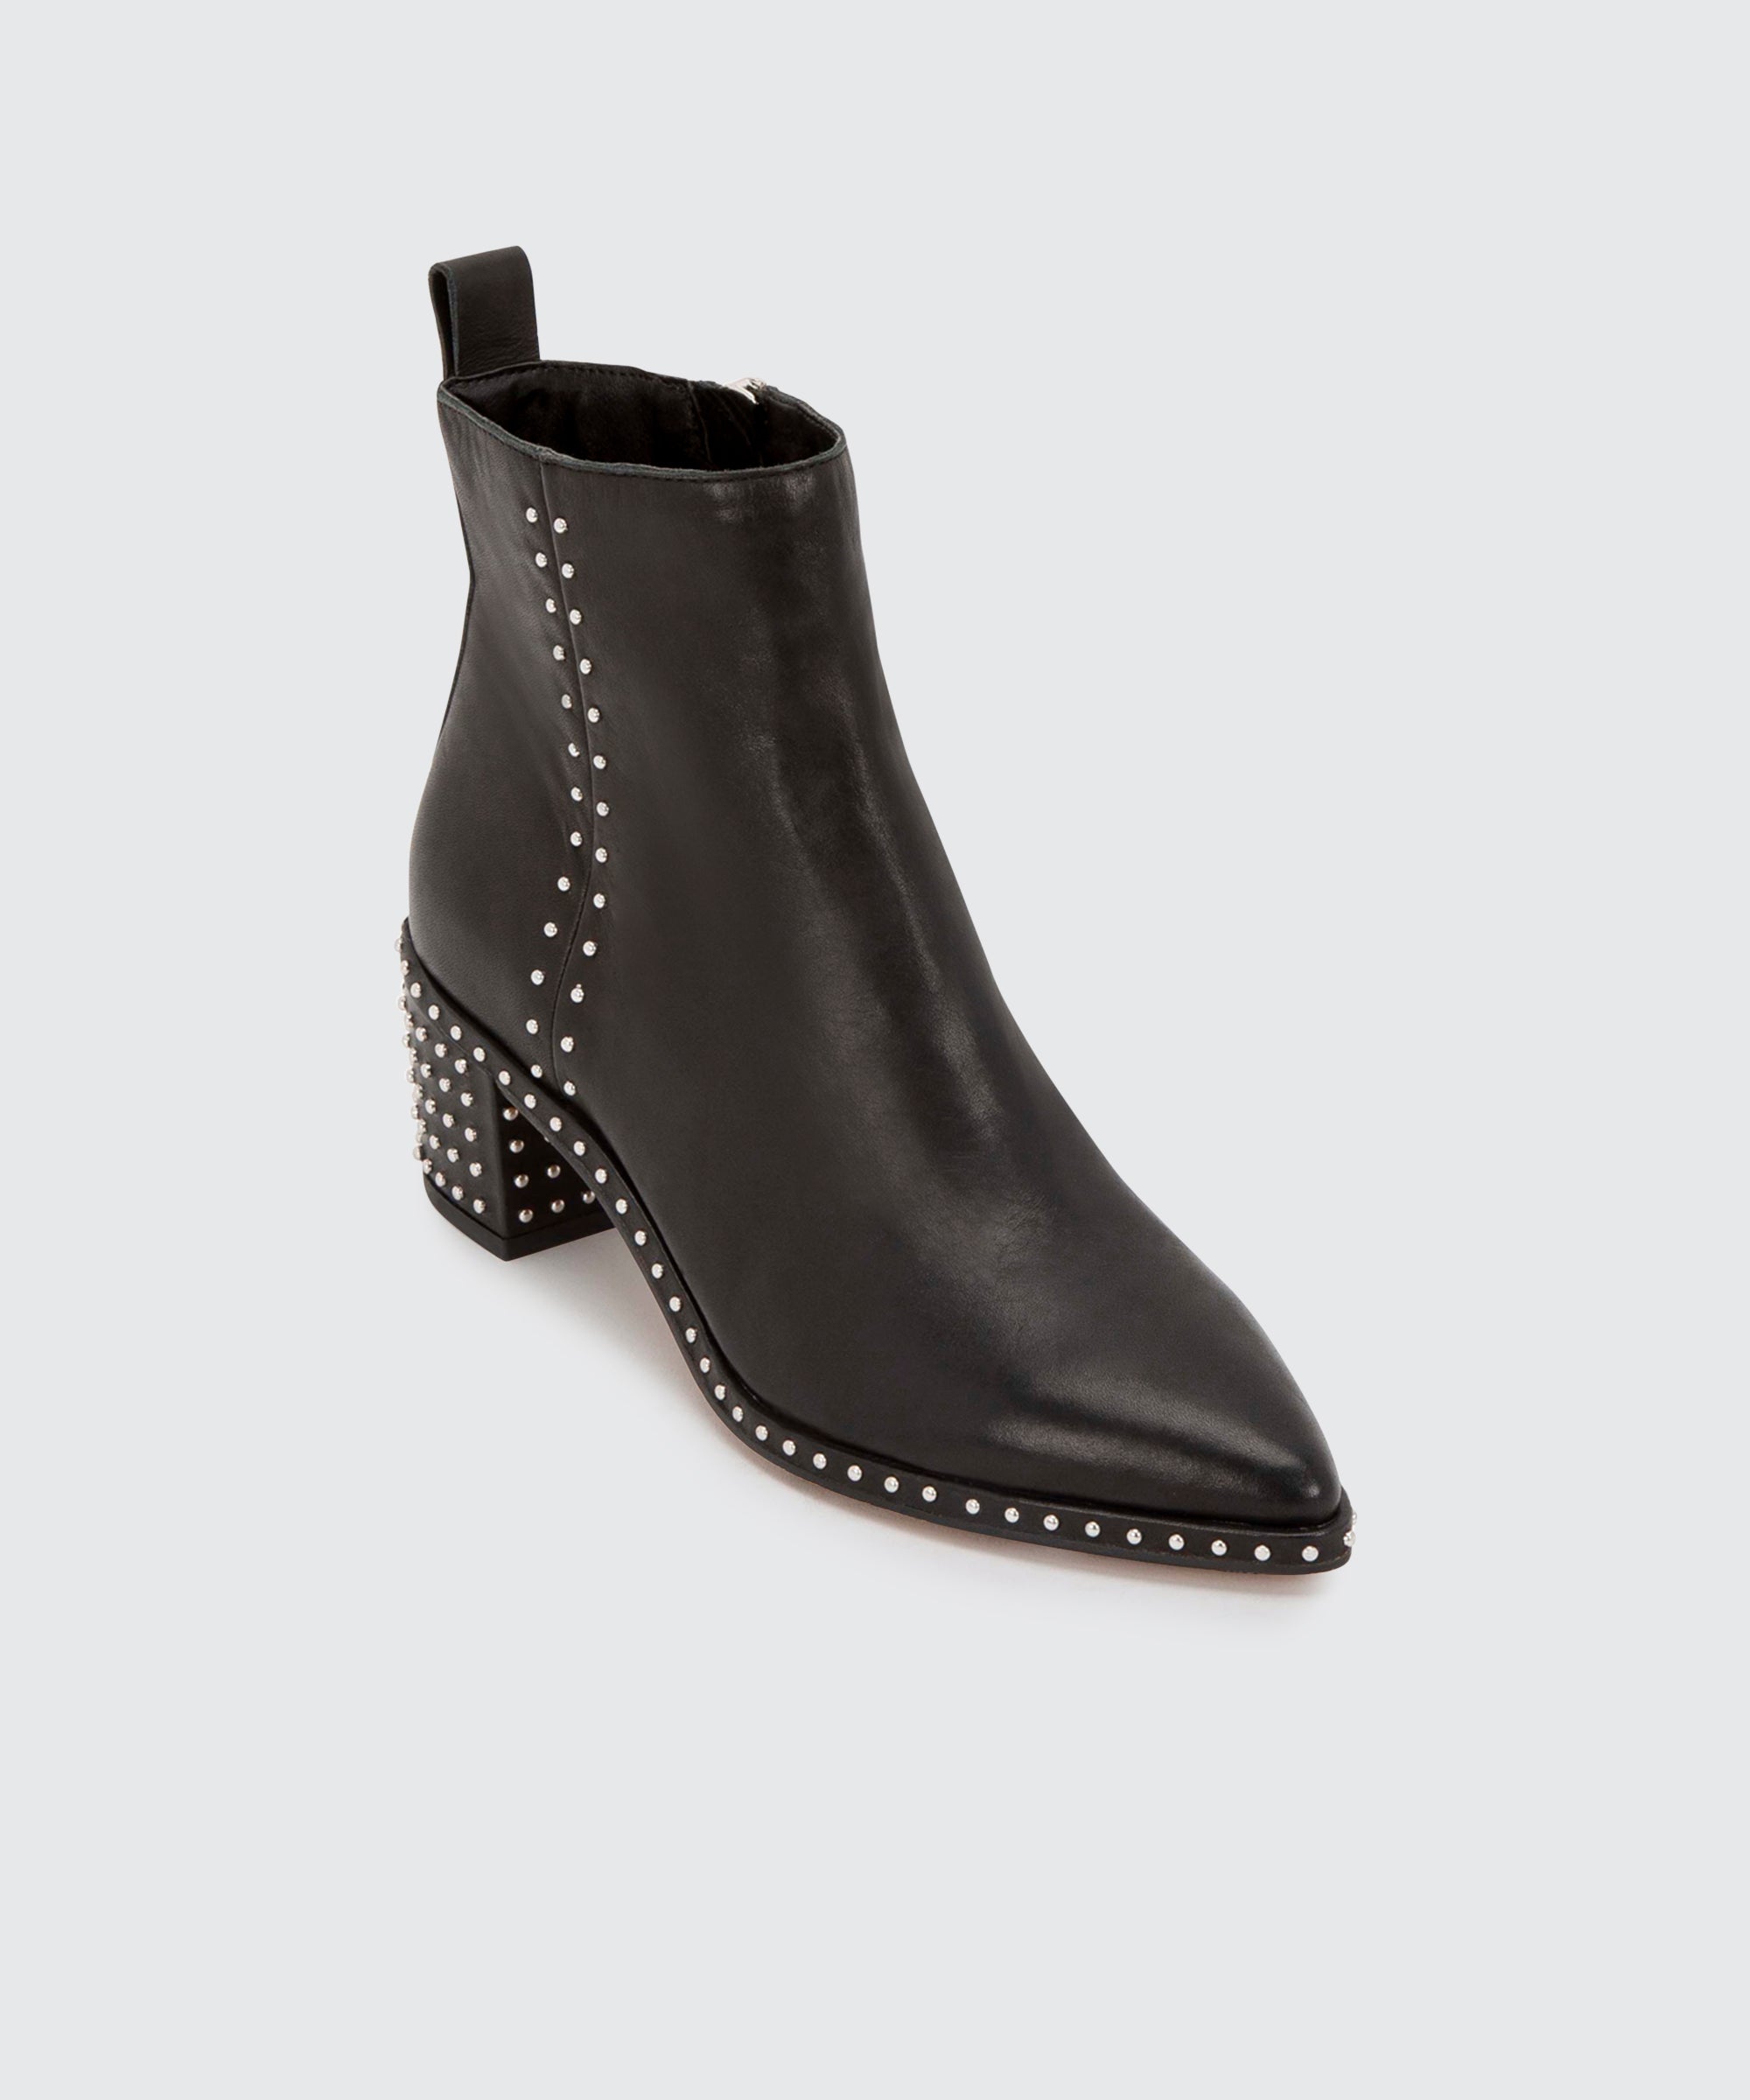 dolce vita white studded booties